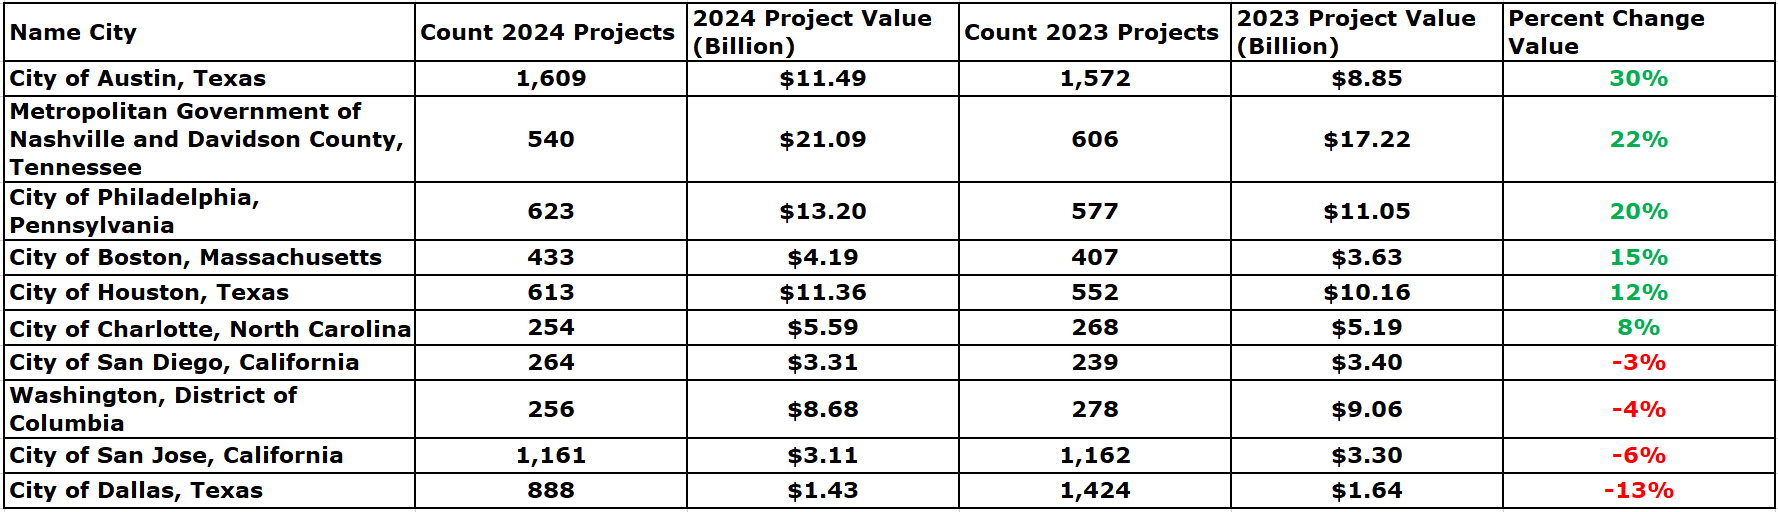 2023 and 2024 Planned Capital Project Count and Value